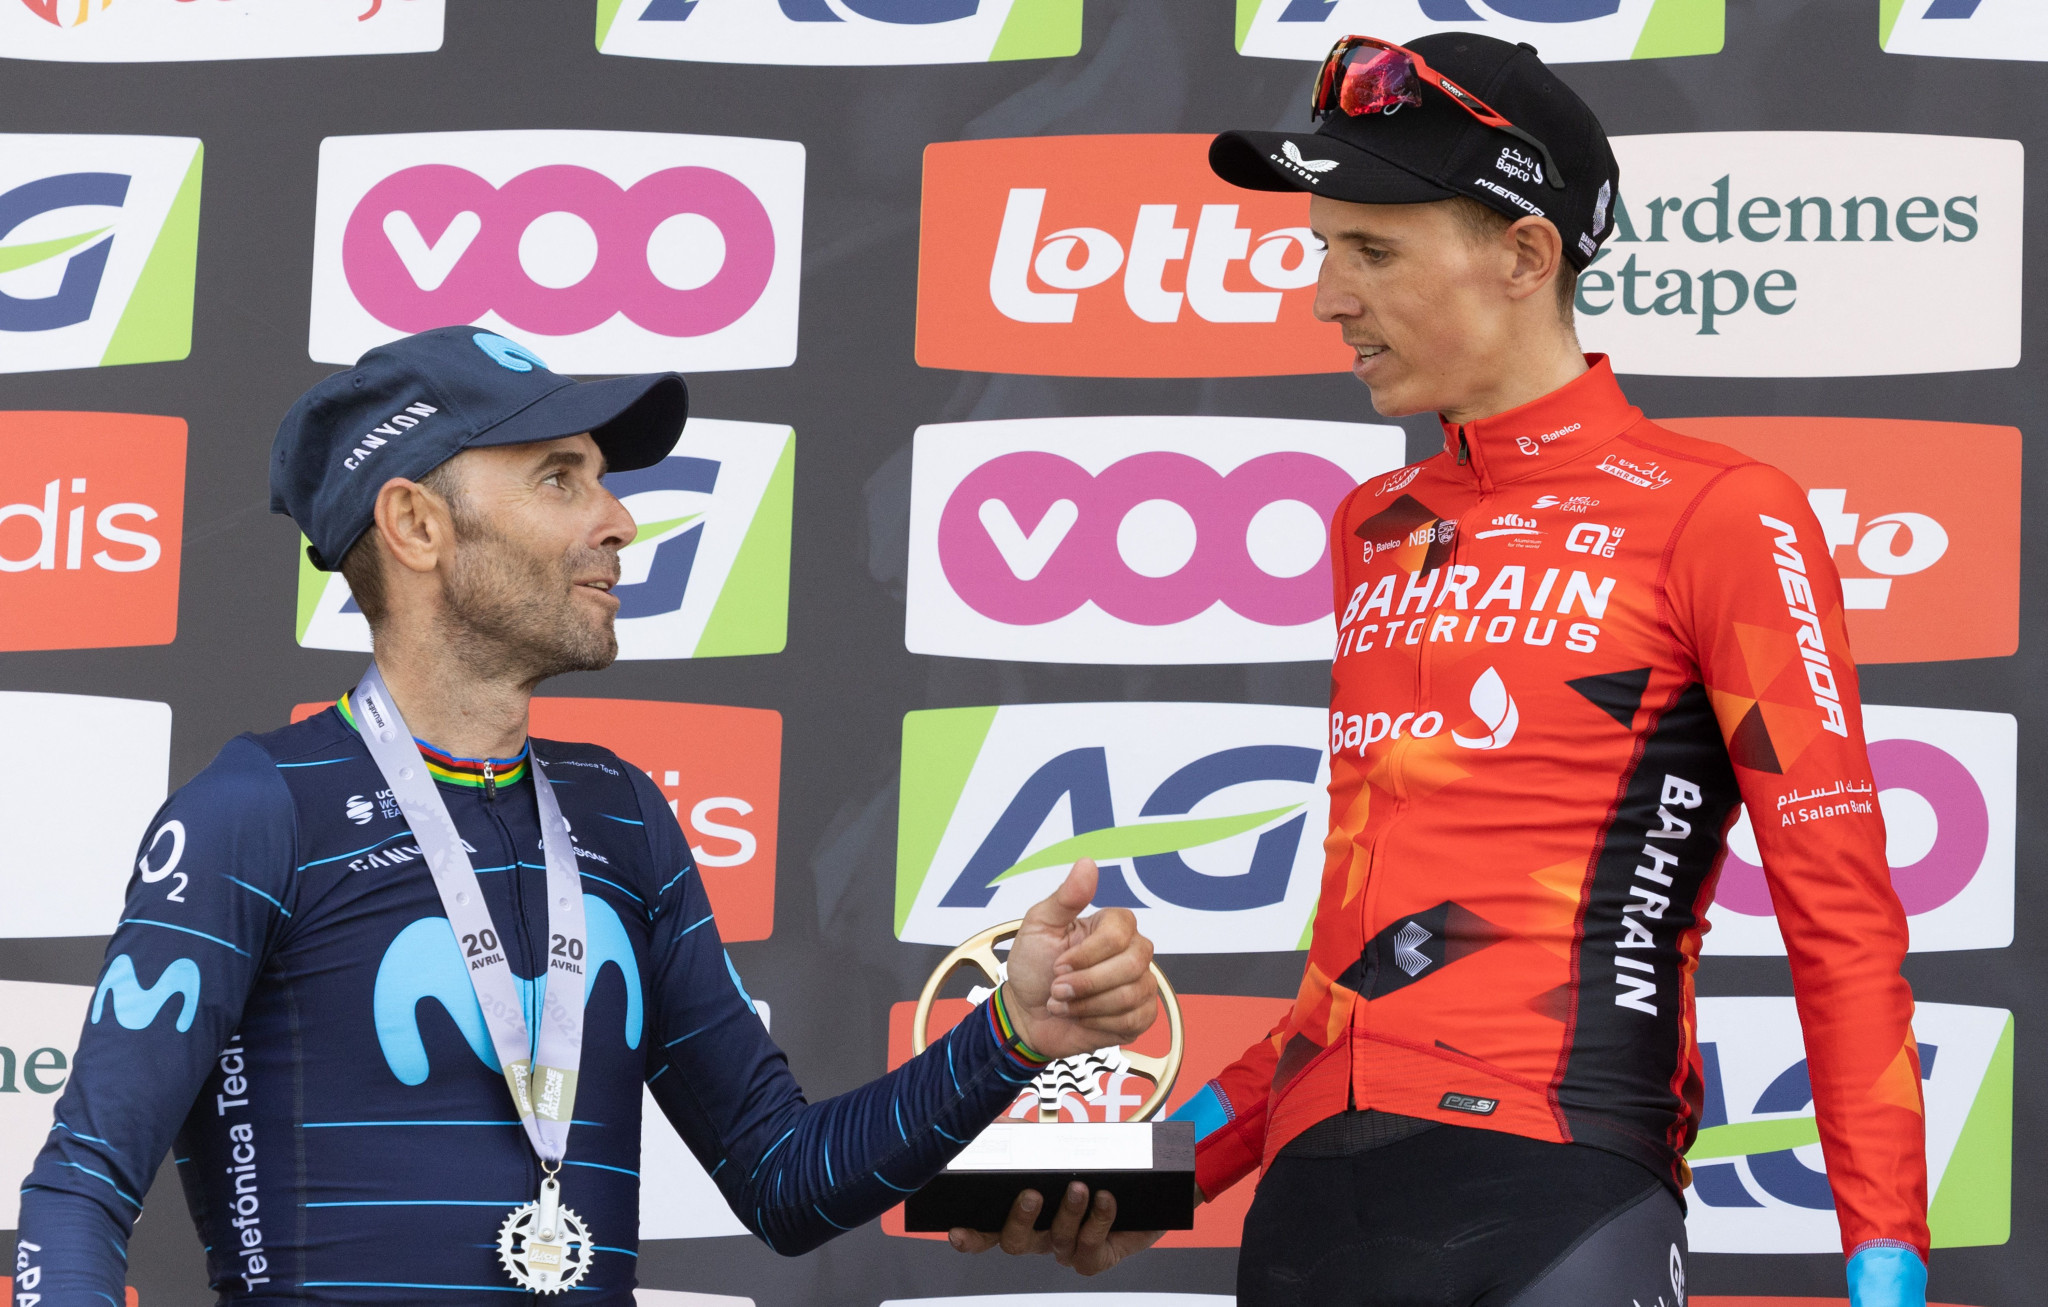 Dylan Teuns, right, overcame record winner Alejandro Valverde at Flèche Wallonne ©Getty Images